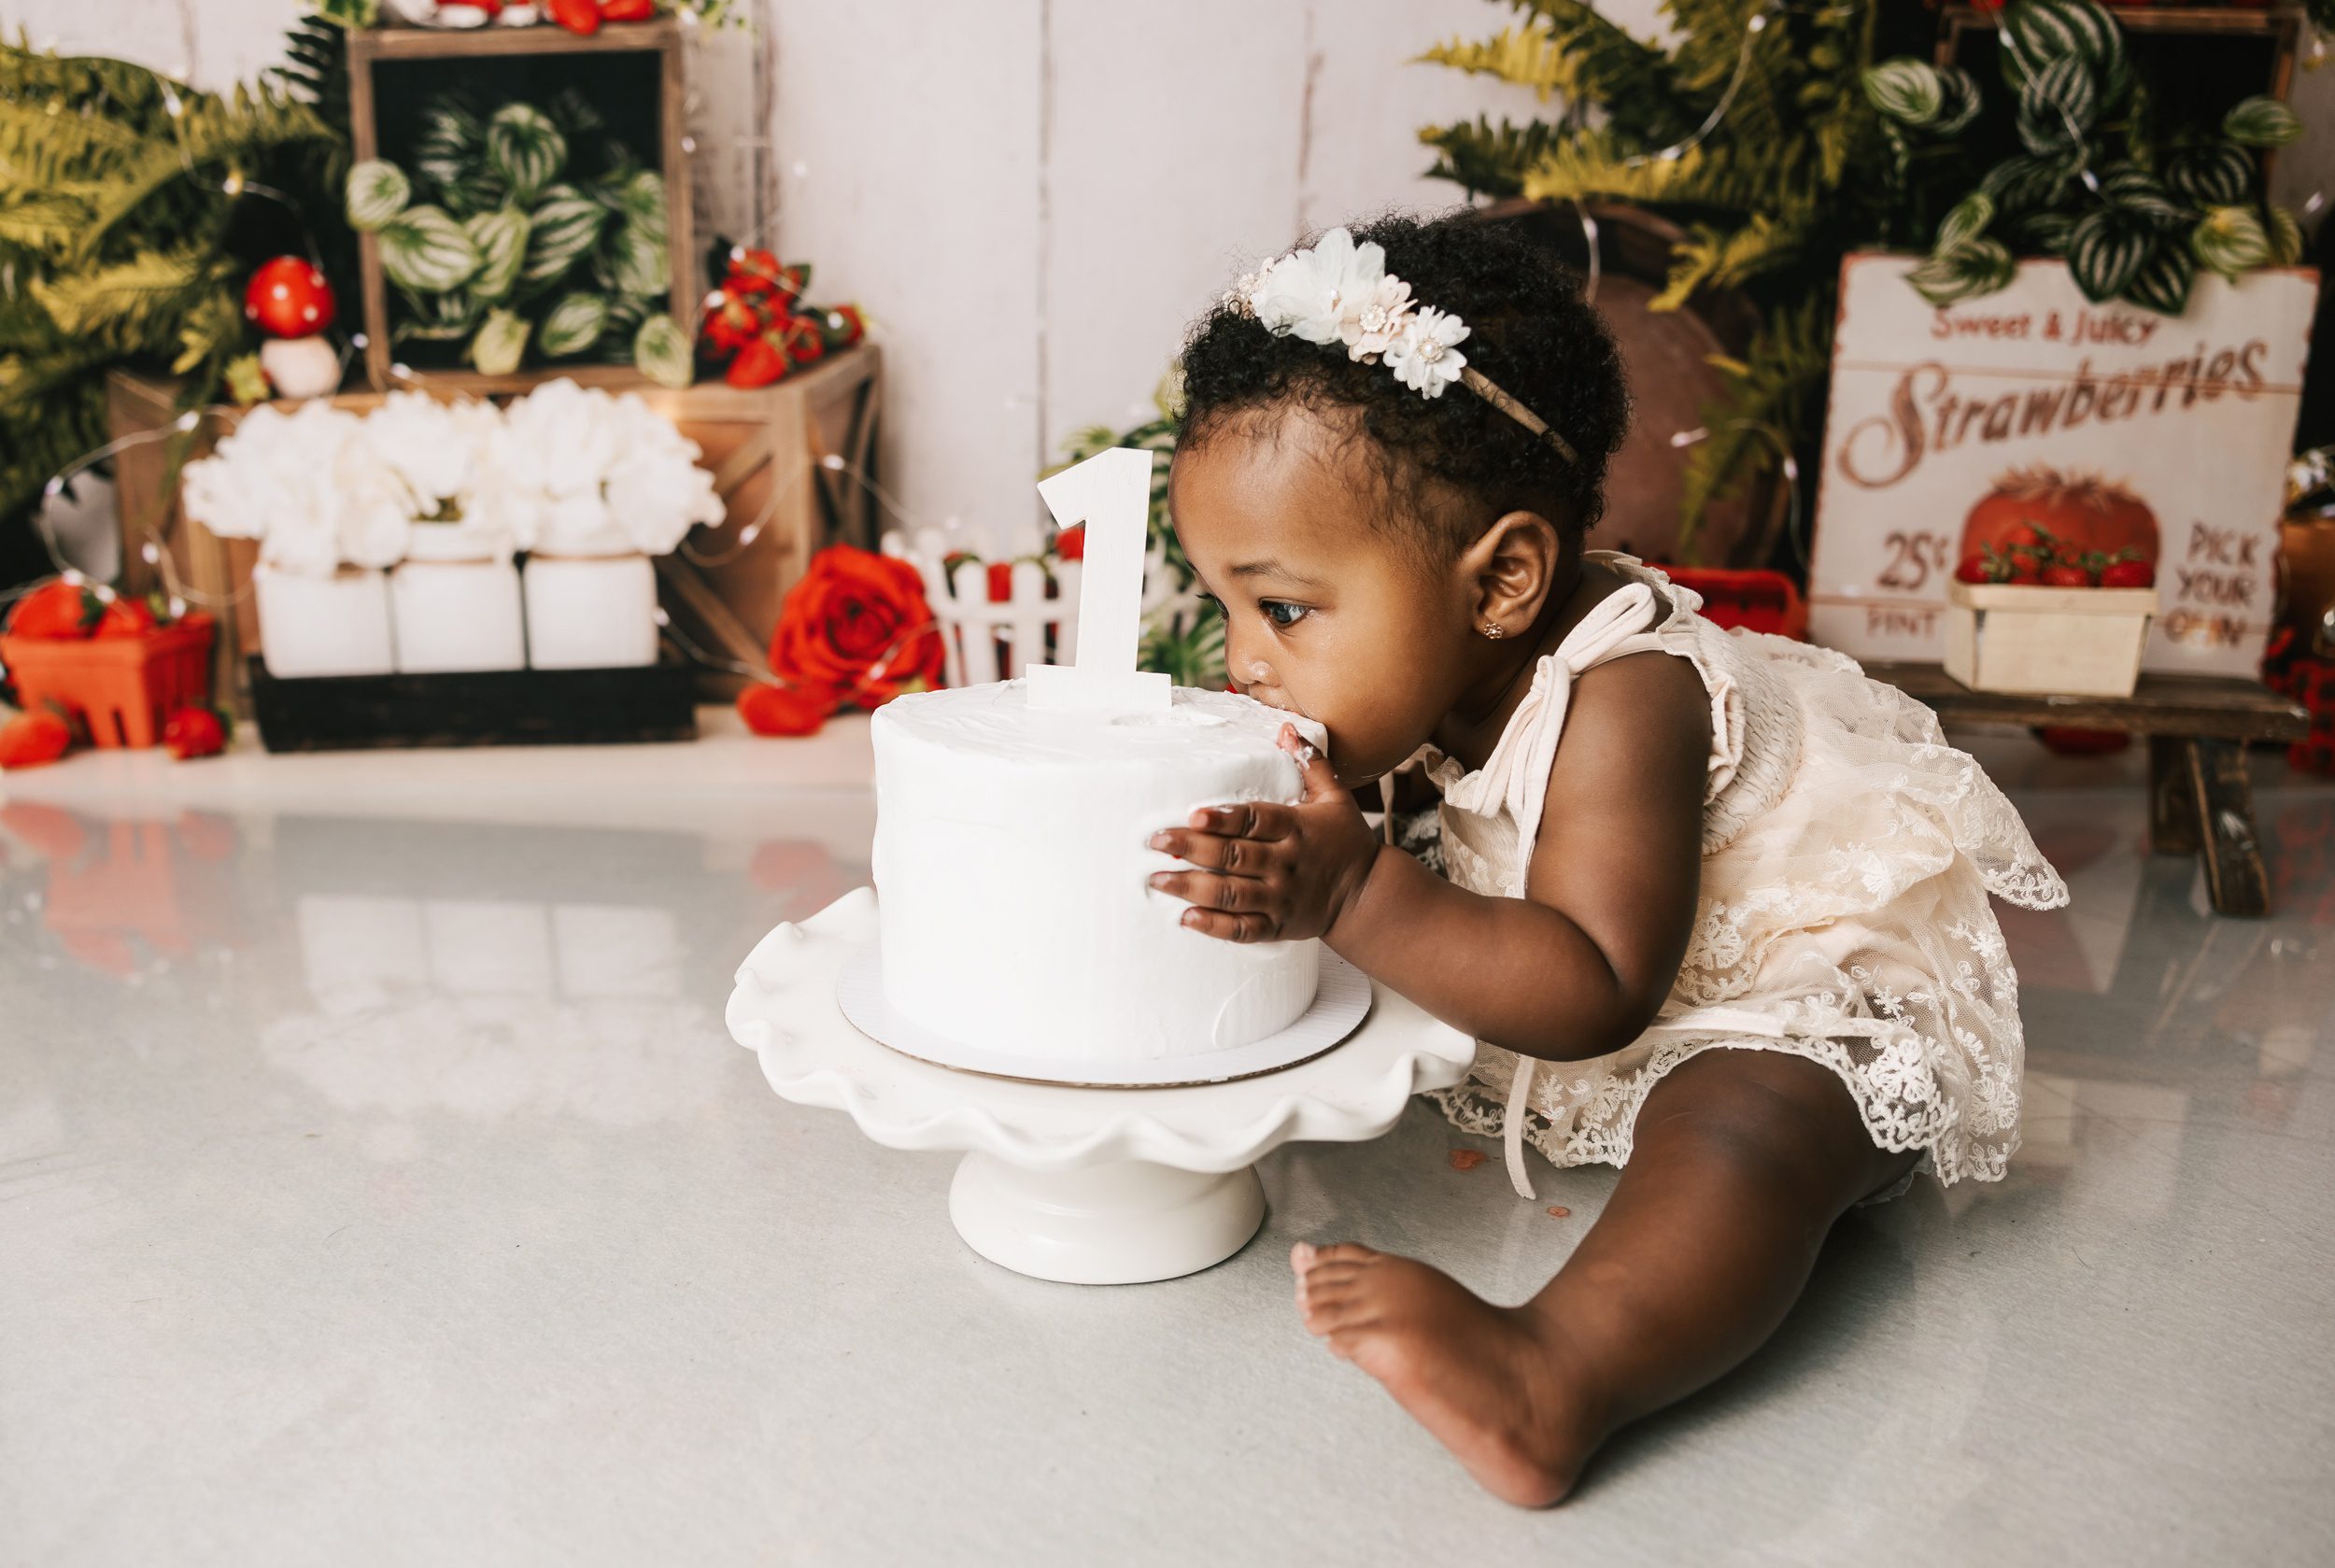 A toddler girl in a lace dress mashes her face into a white cake with a 1 on it